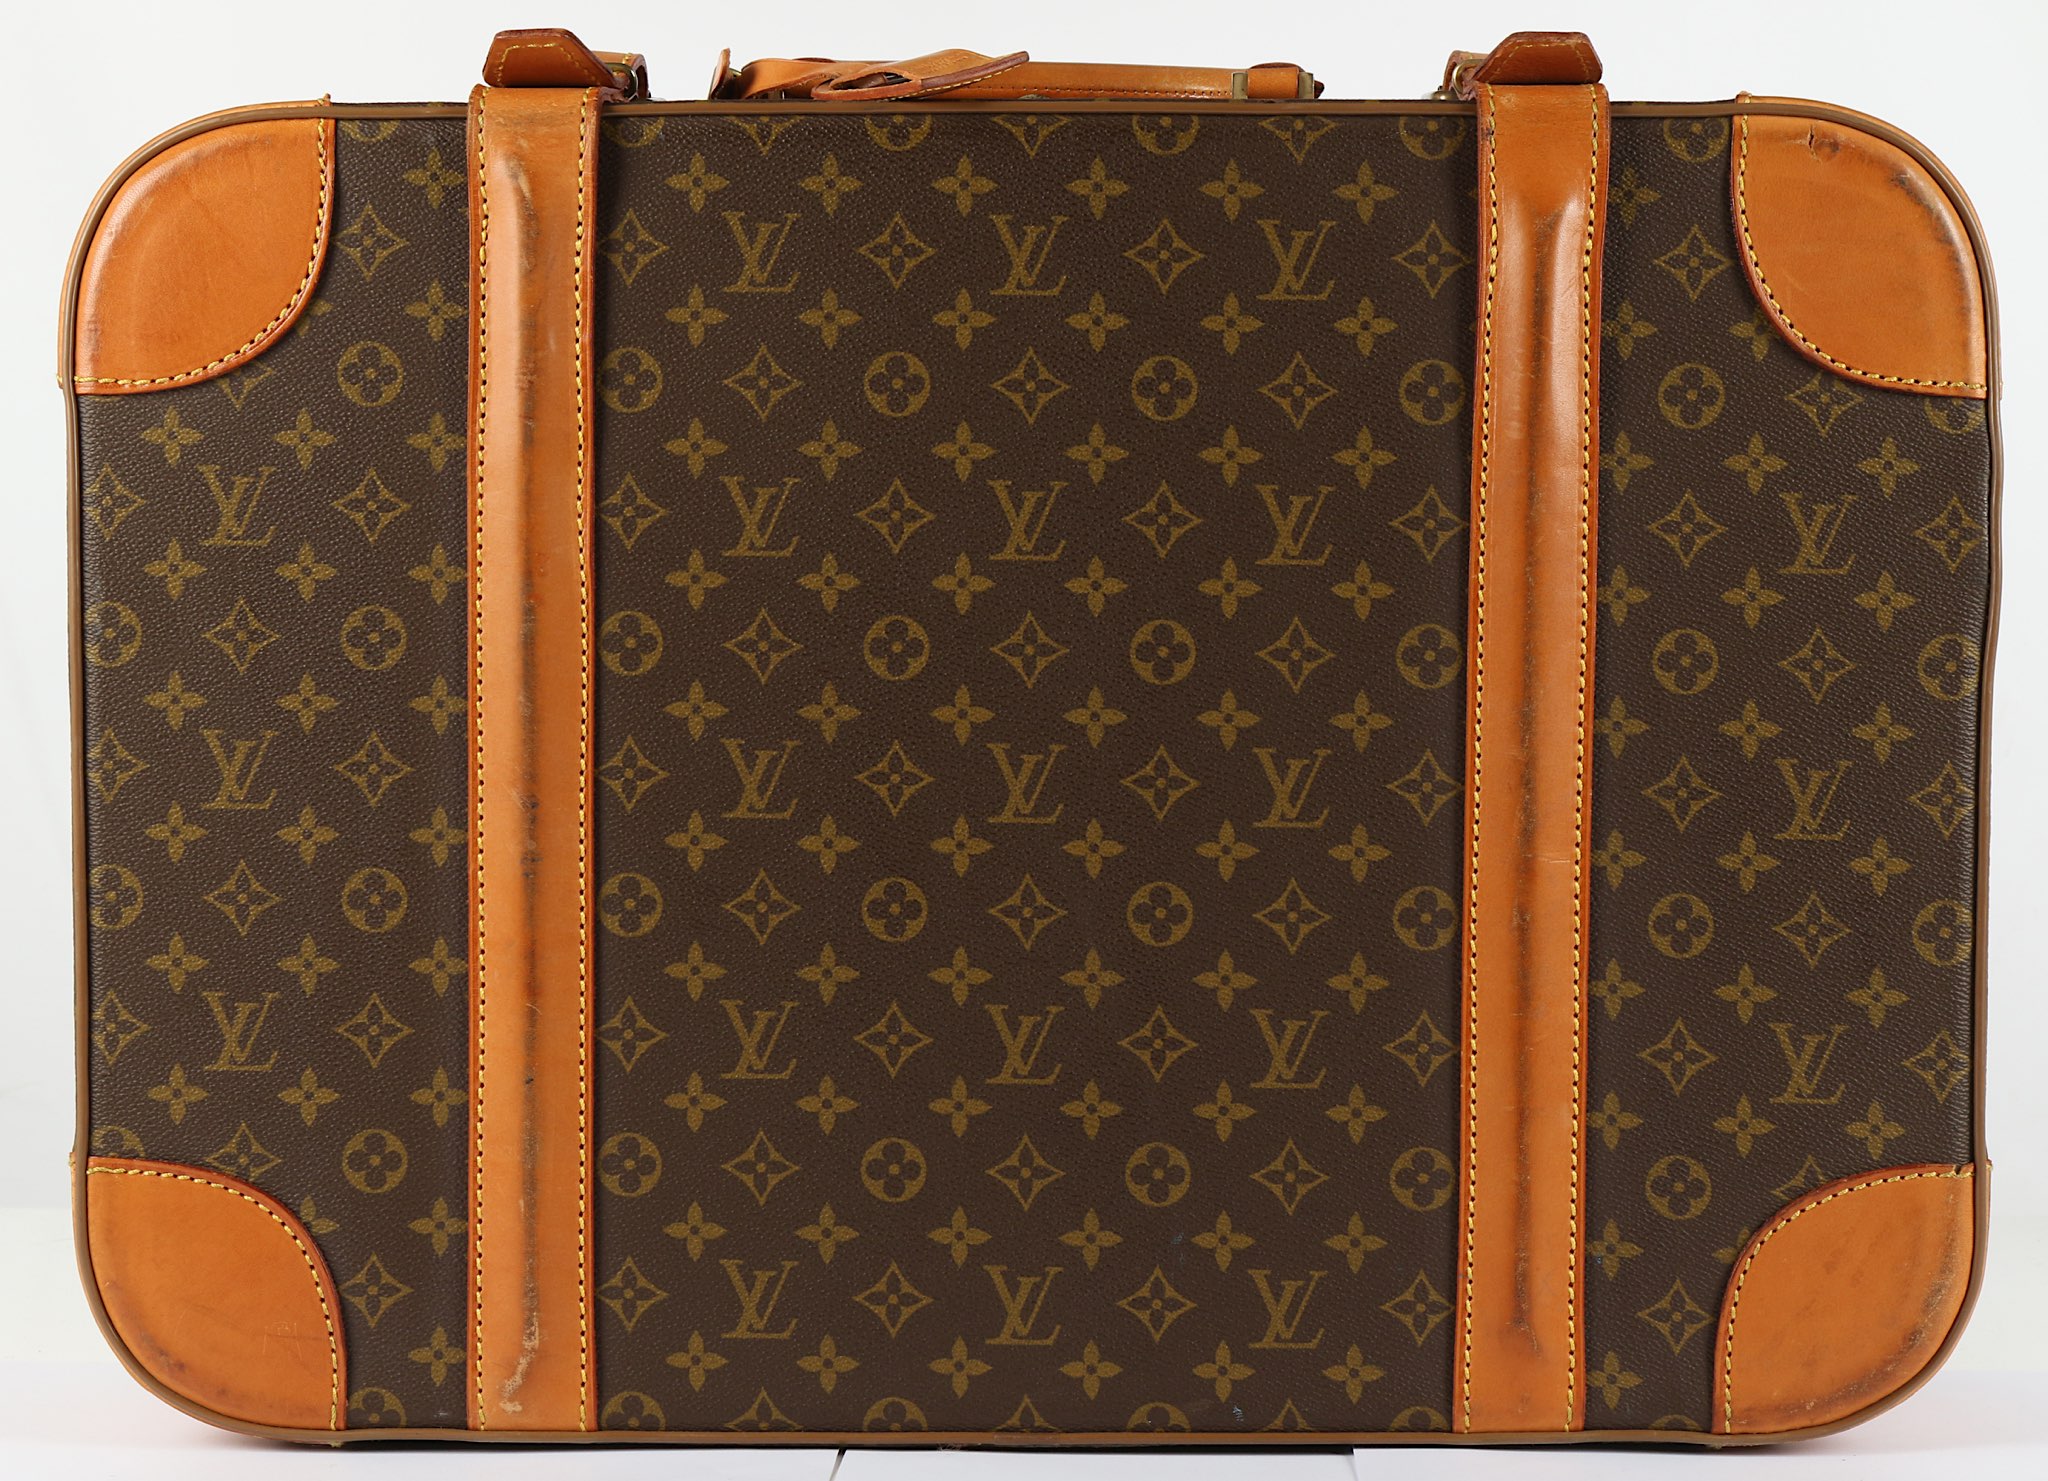 Louis Vuitton Stratos Suitcase 60, early 1980s, mo - Image 3 of 6